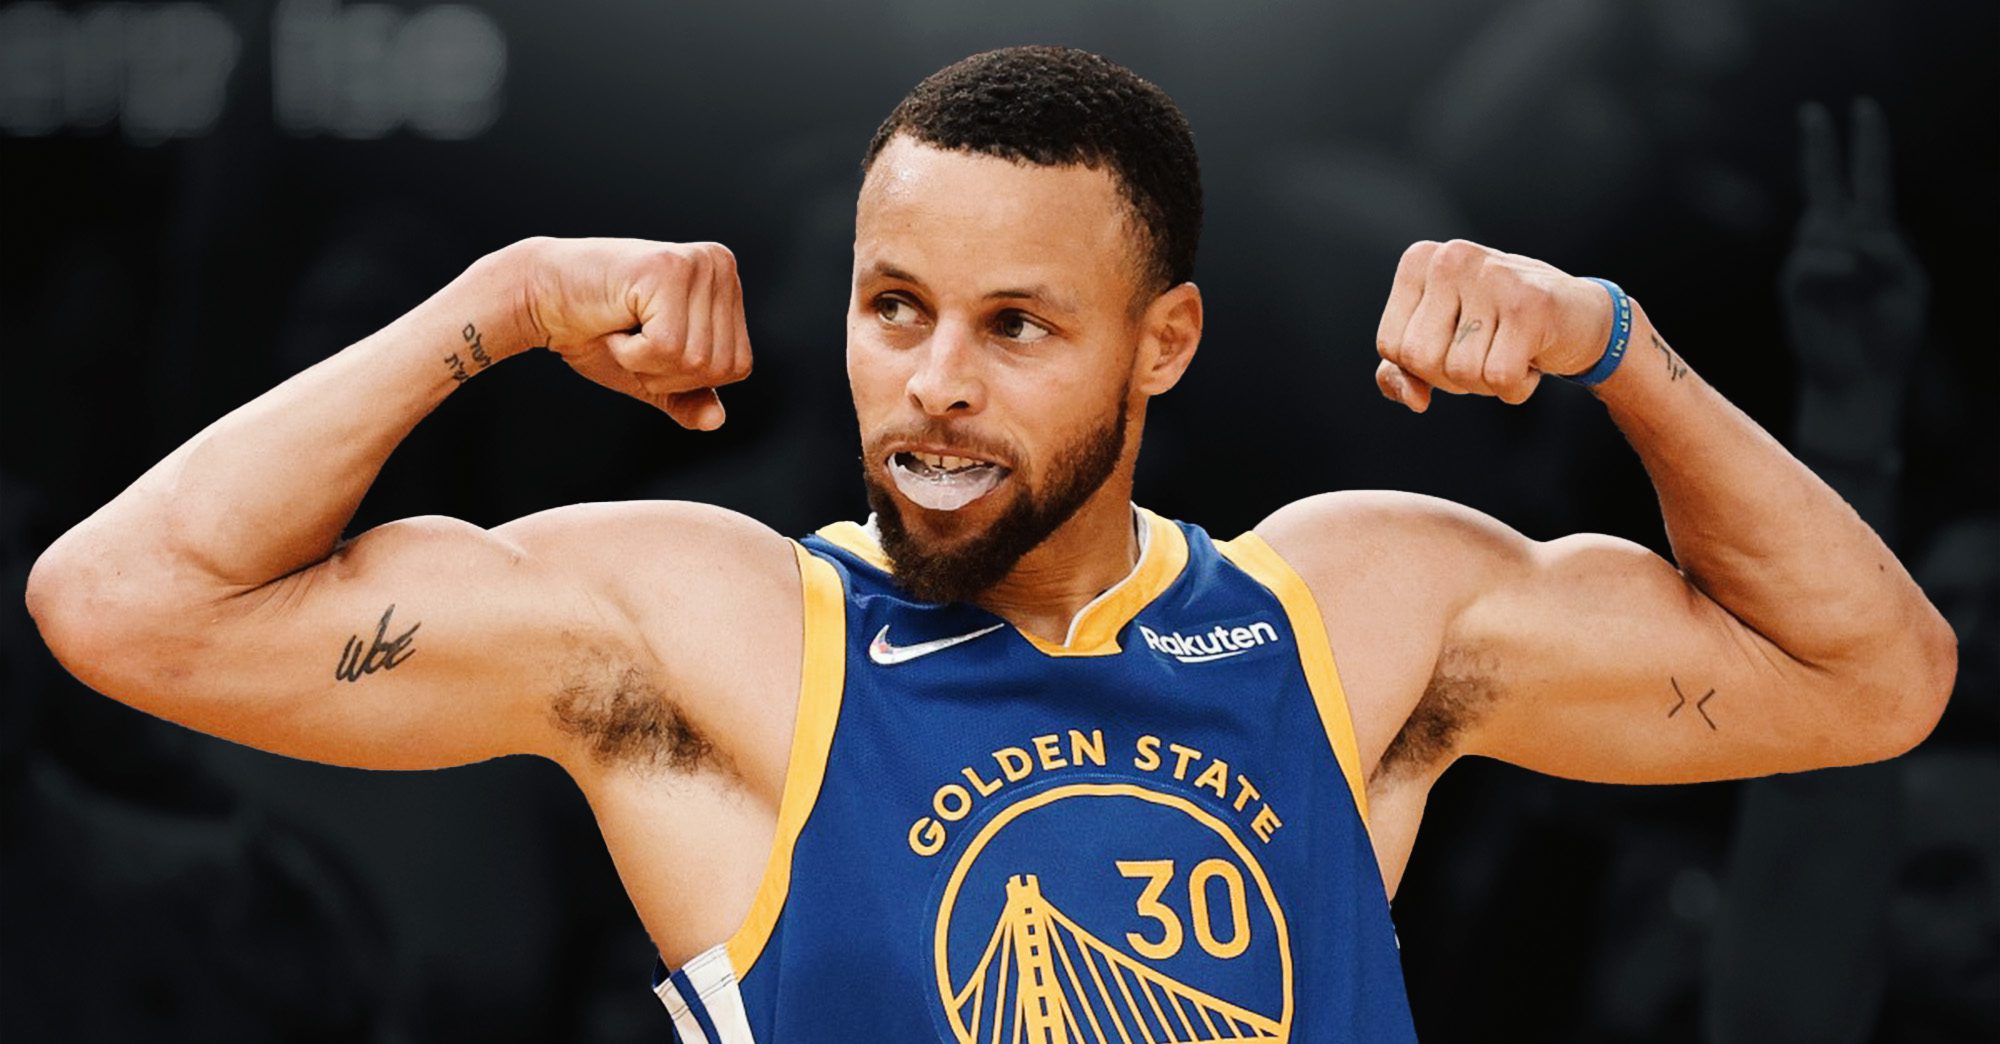 WATCH: Steph Curry’s Wild Workout in Dubai